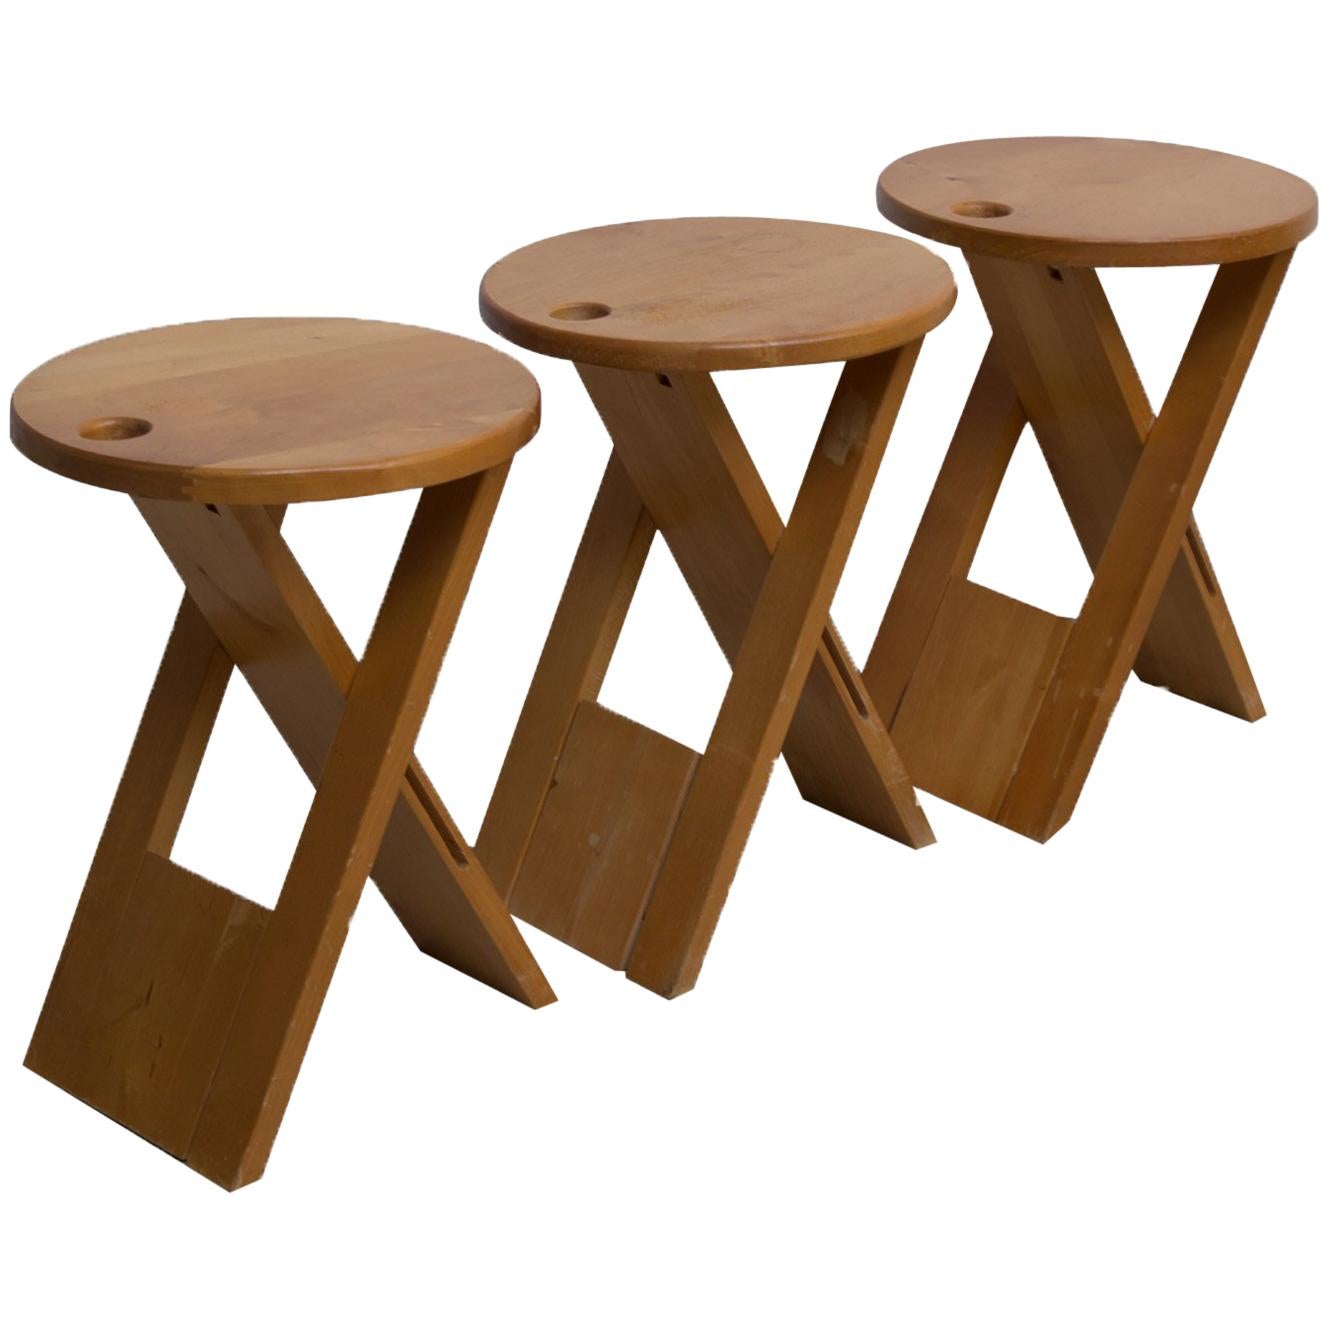 Vintage Beech Suzy Stools by Adrian Reed for Princes Design Works Ltd, 1980s